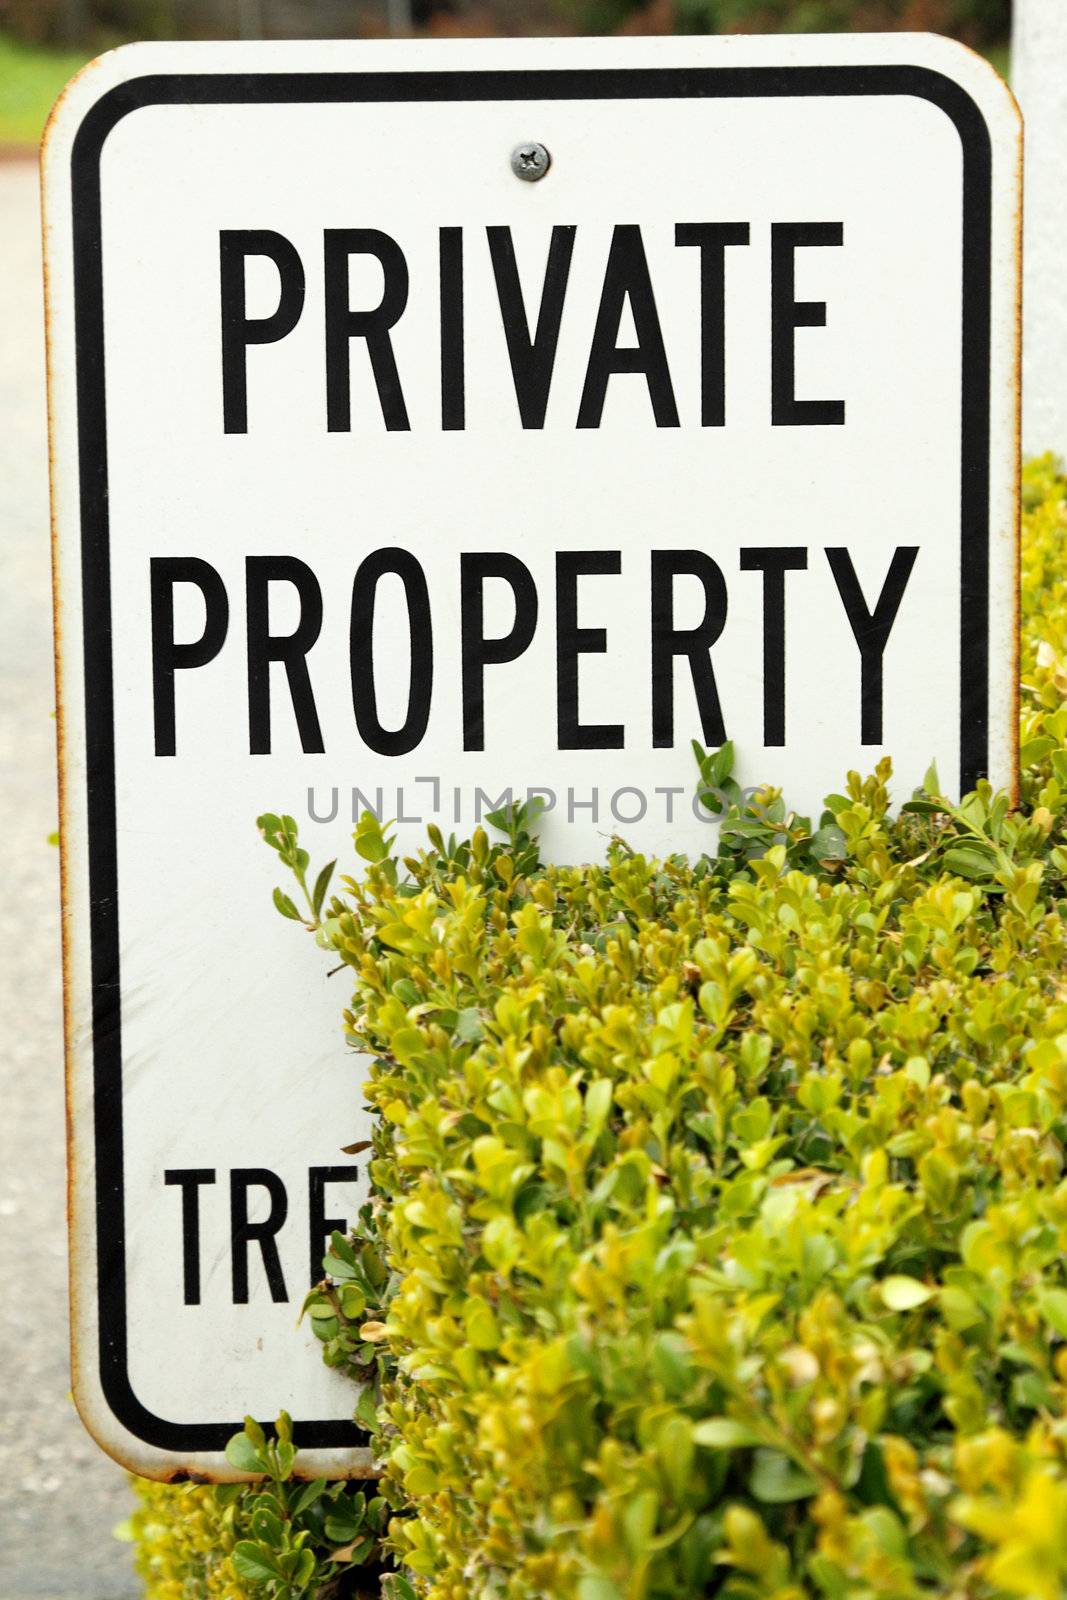 White private property sign with black letters